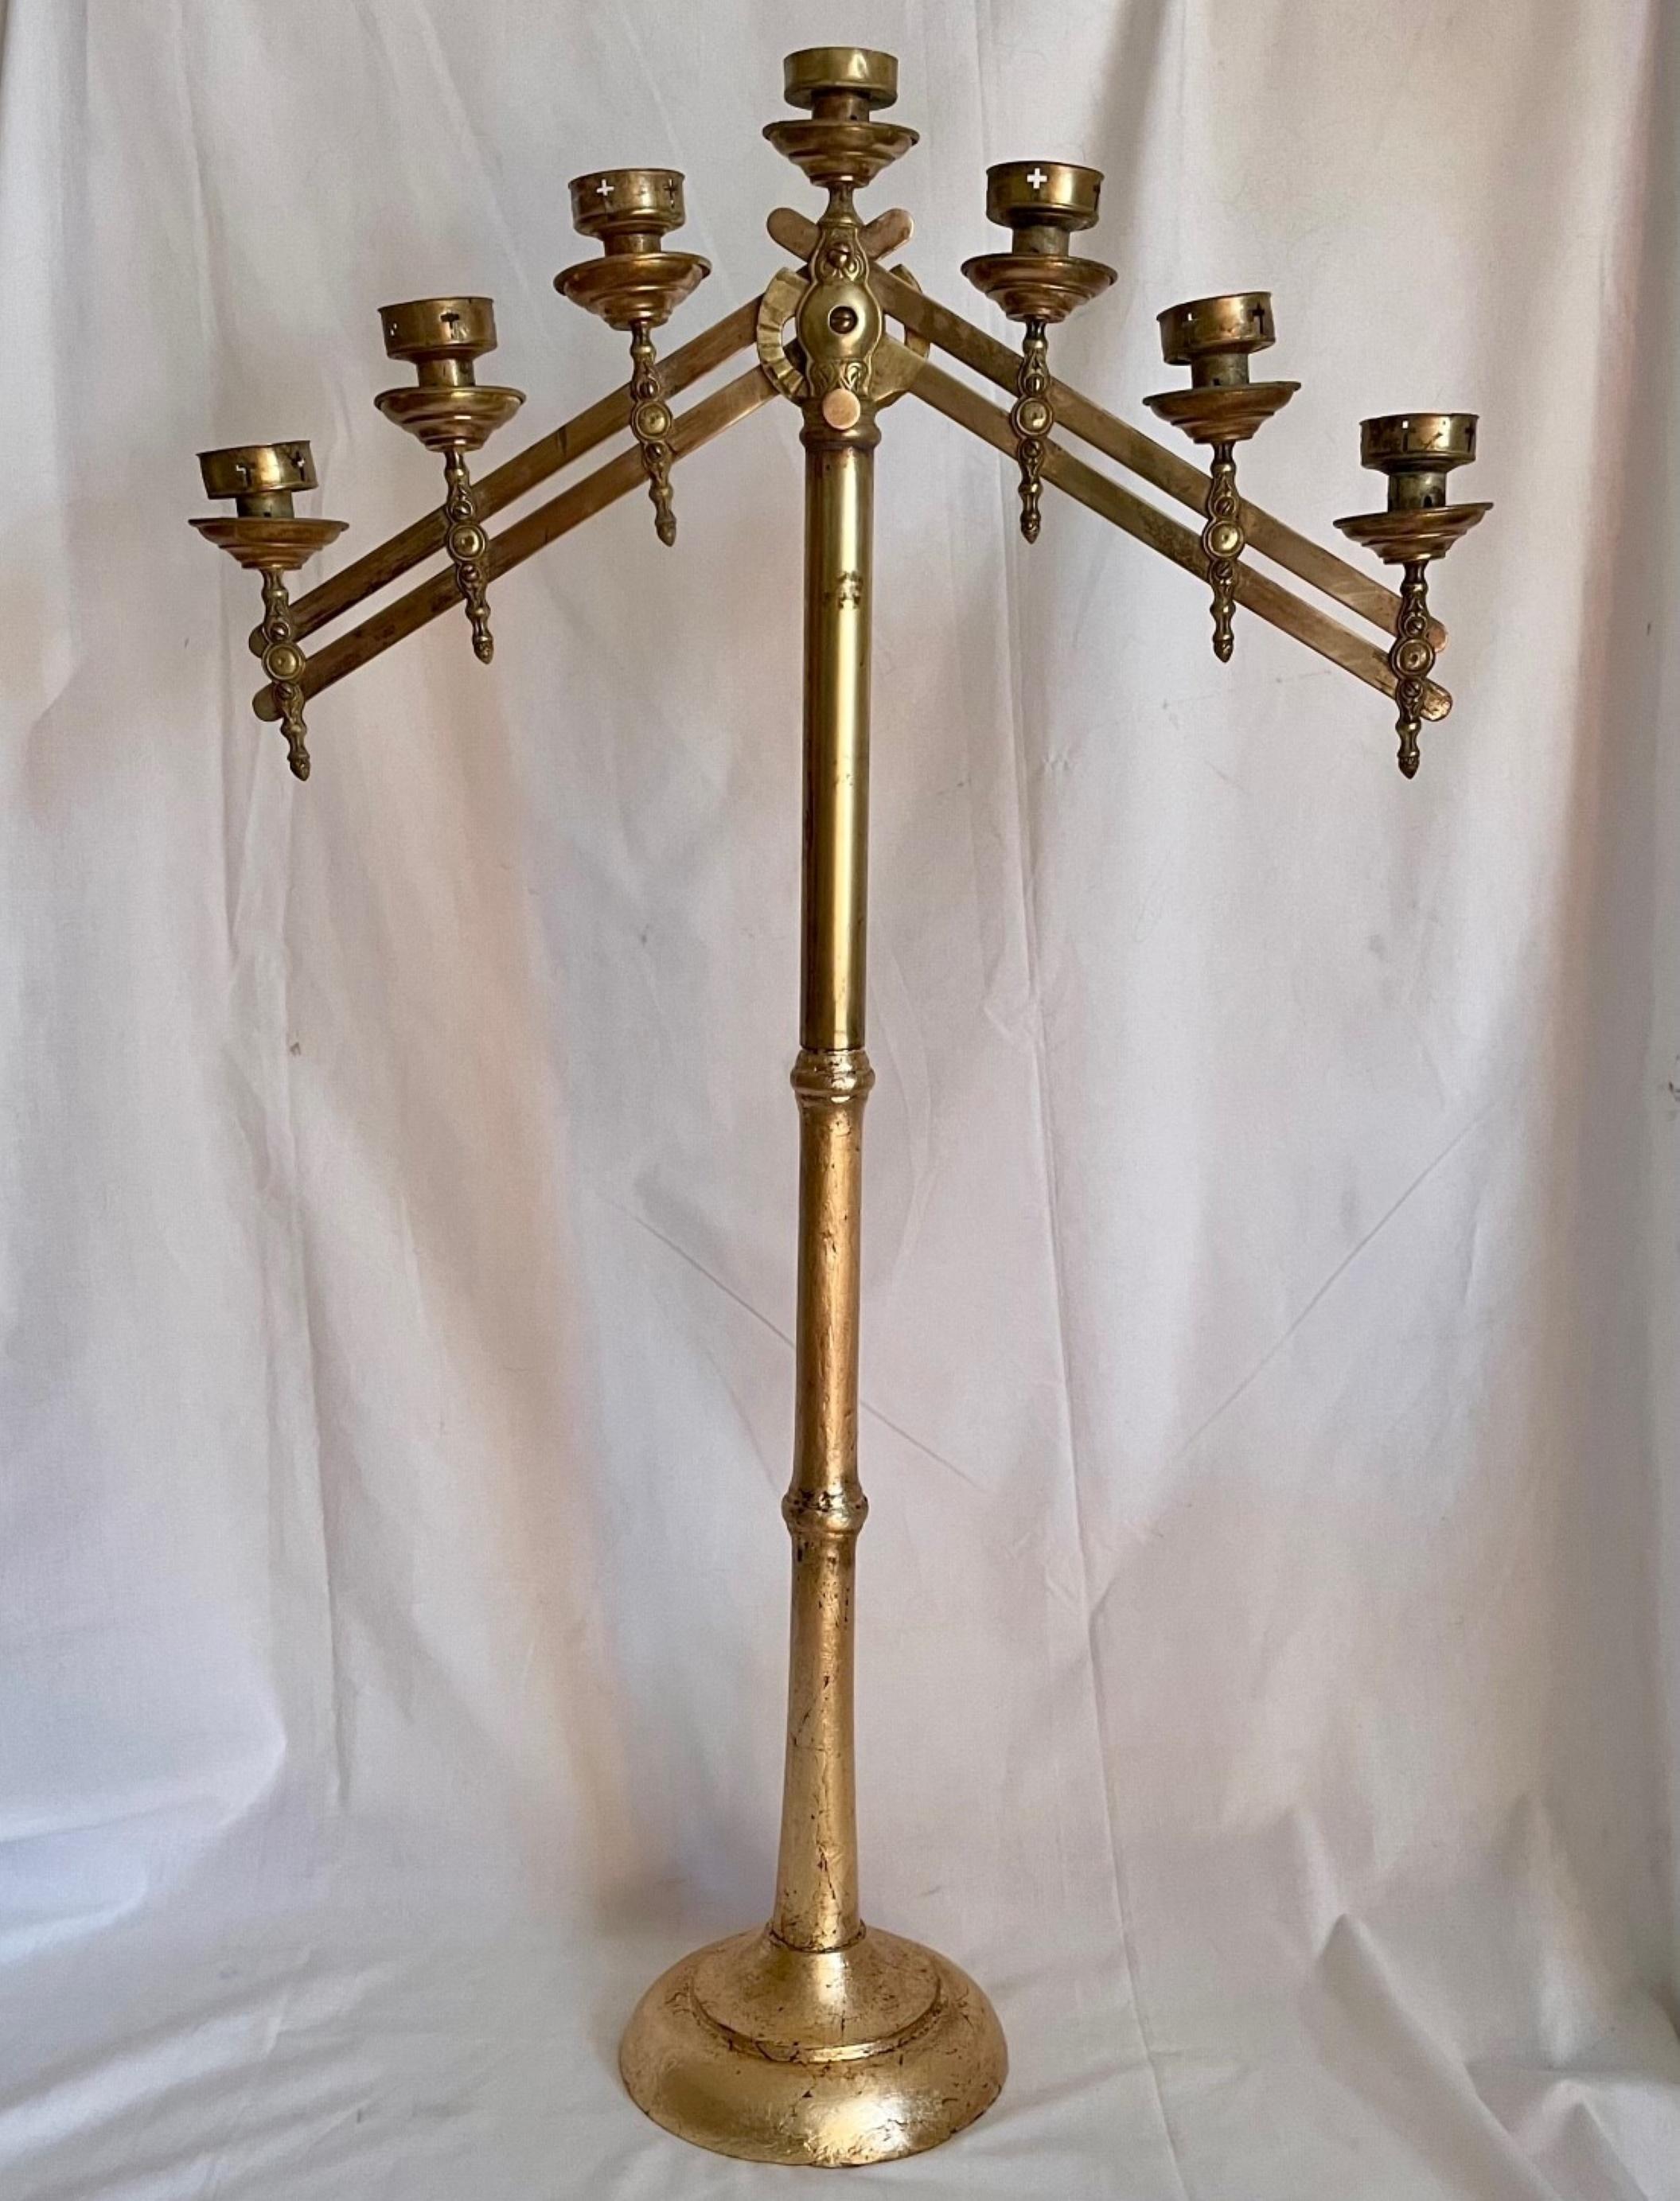 Antique adjustable brass floor candelabra

This floor candelabra with adjustable arms has 7 matching cups with drip pans. The patinated brass candelabra stands on a round footed giltwood base. The decorative arms extend to various directions and